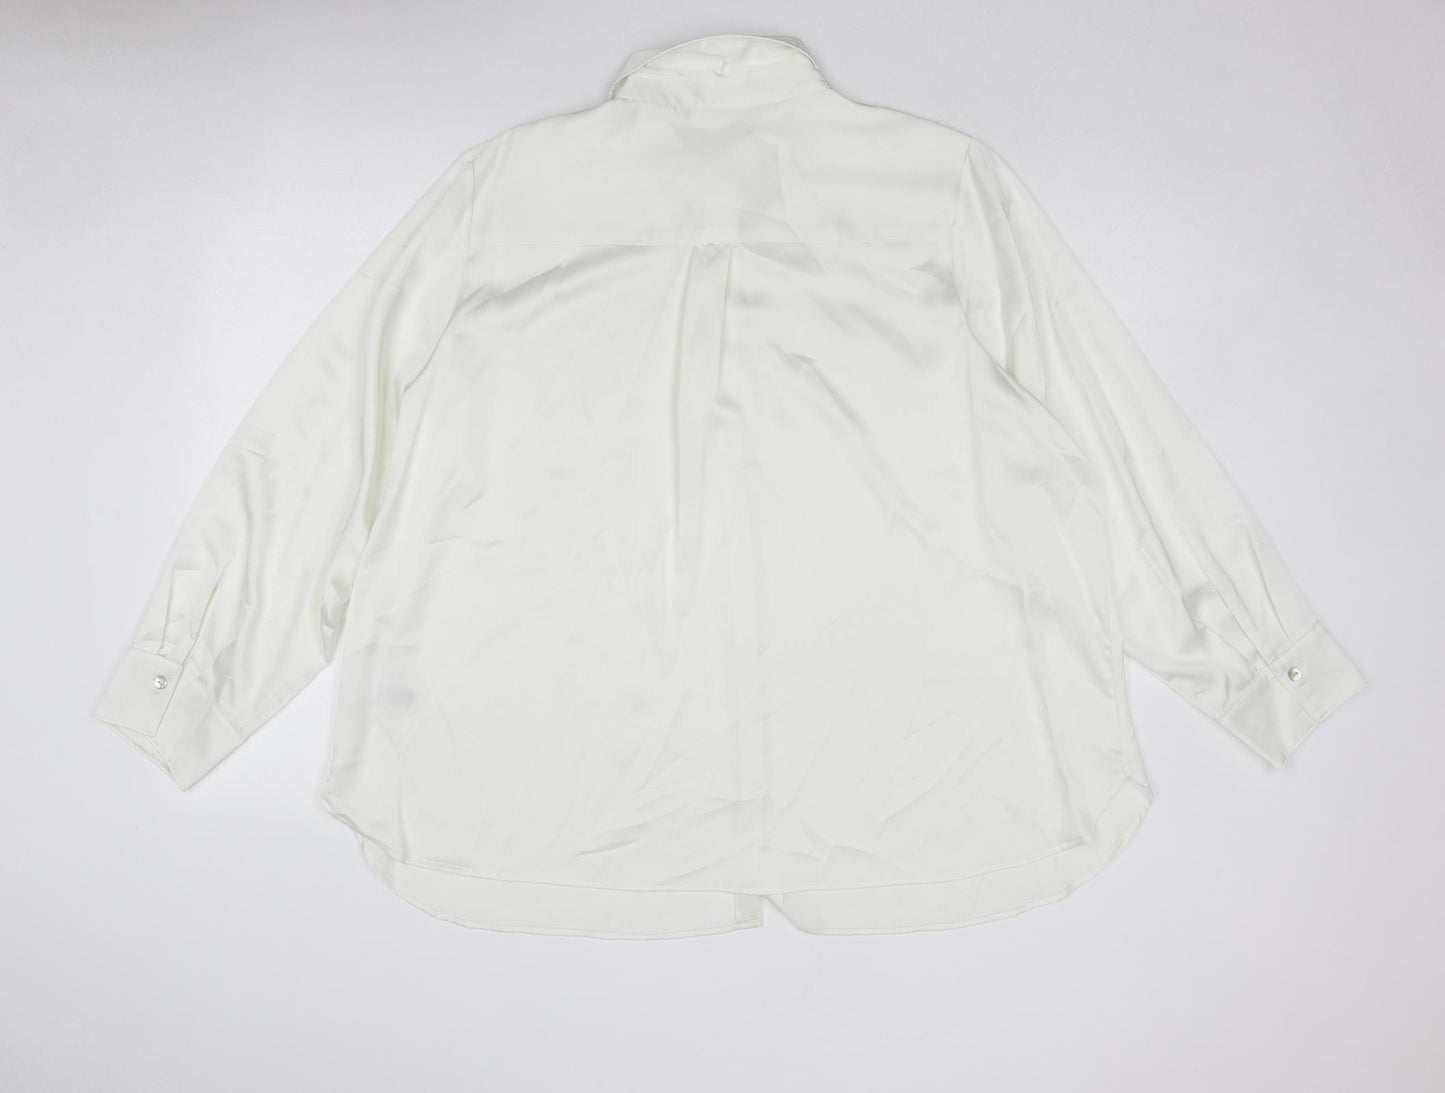 Marks and Spencer Womens White Polyester Basic Button-Up Size 22 Collared